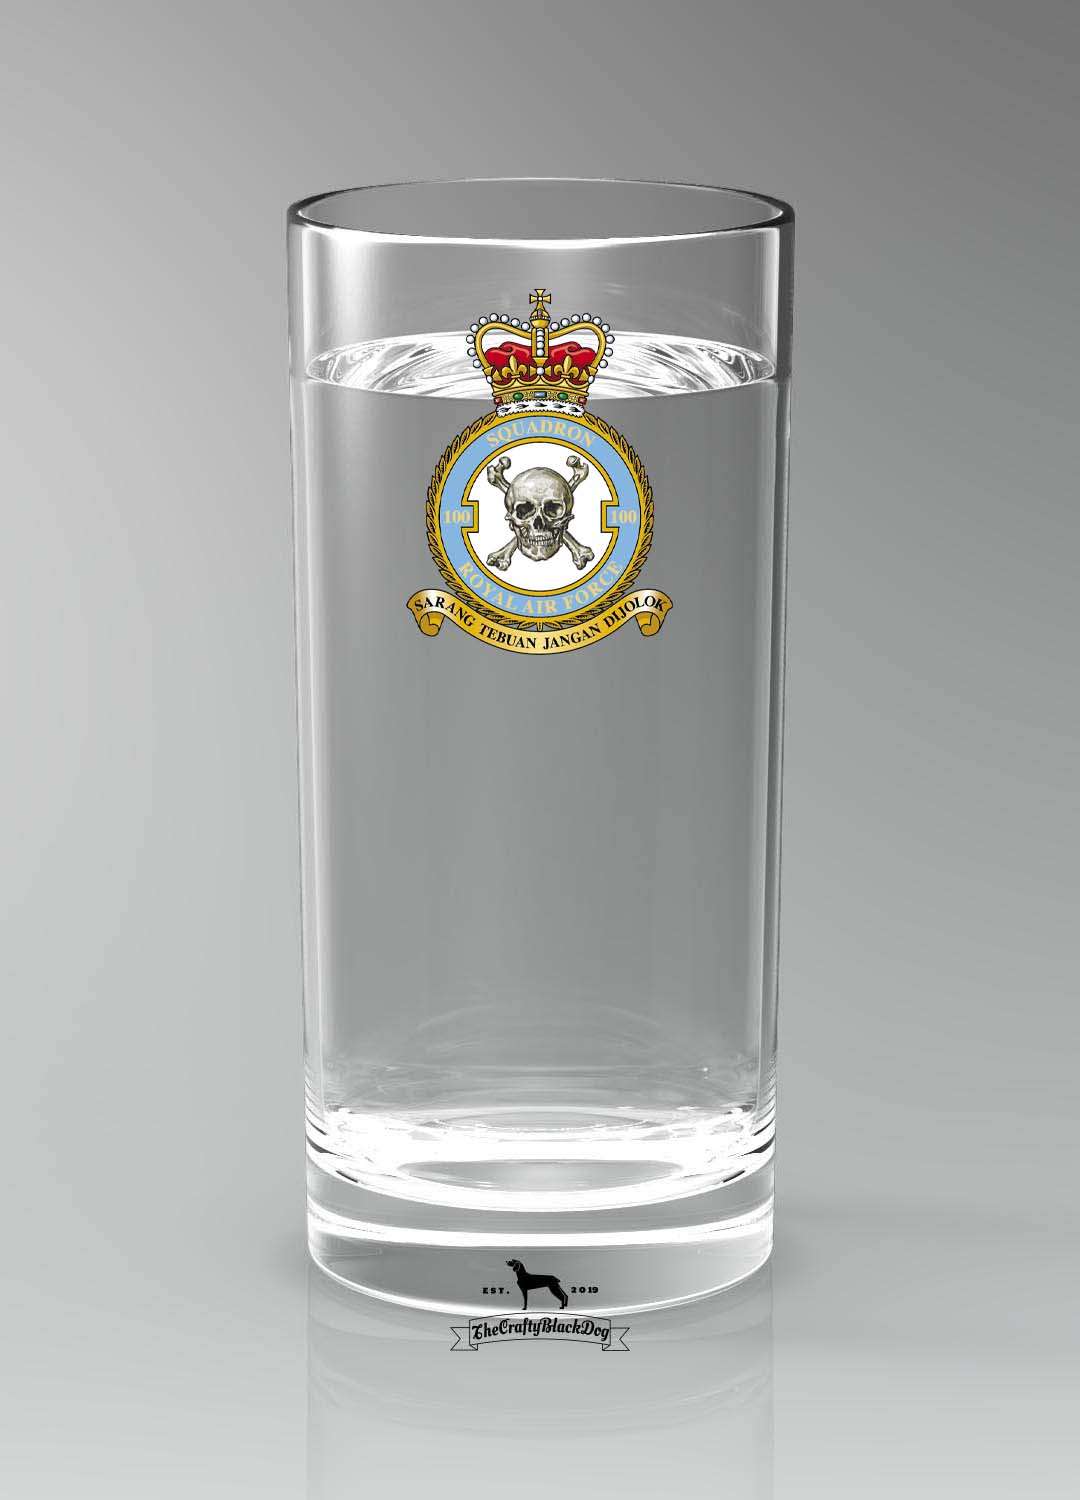 100 Squadron RAF - Straight Gin/Mixer/Water Glass